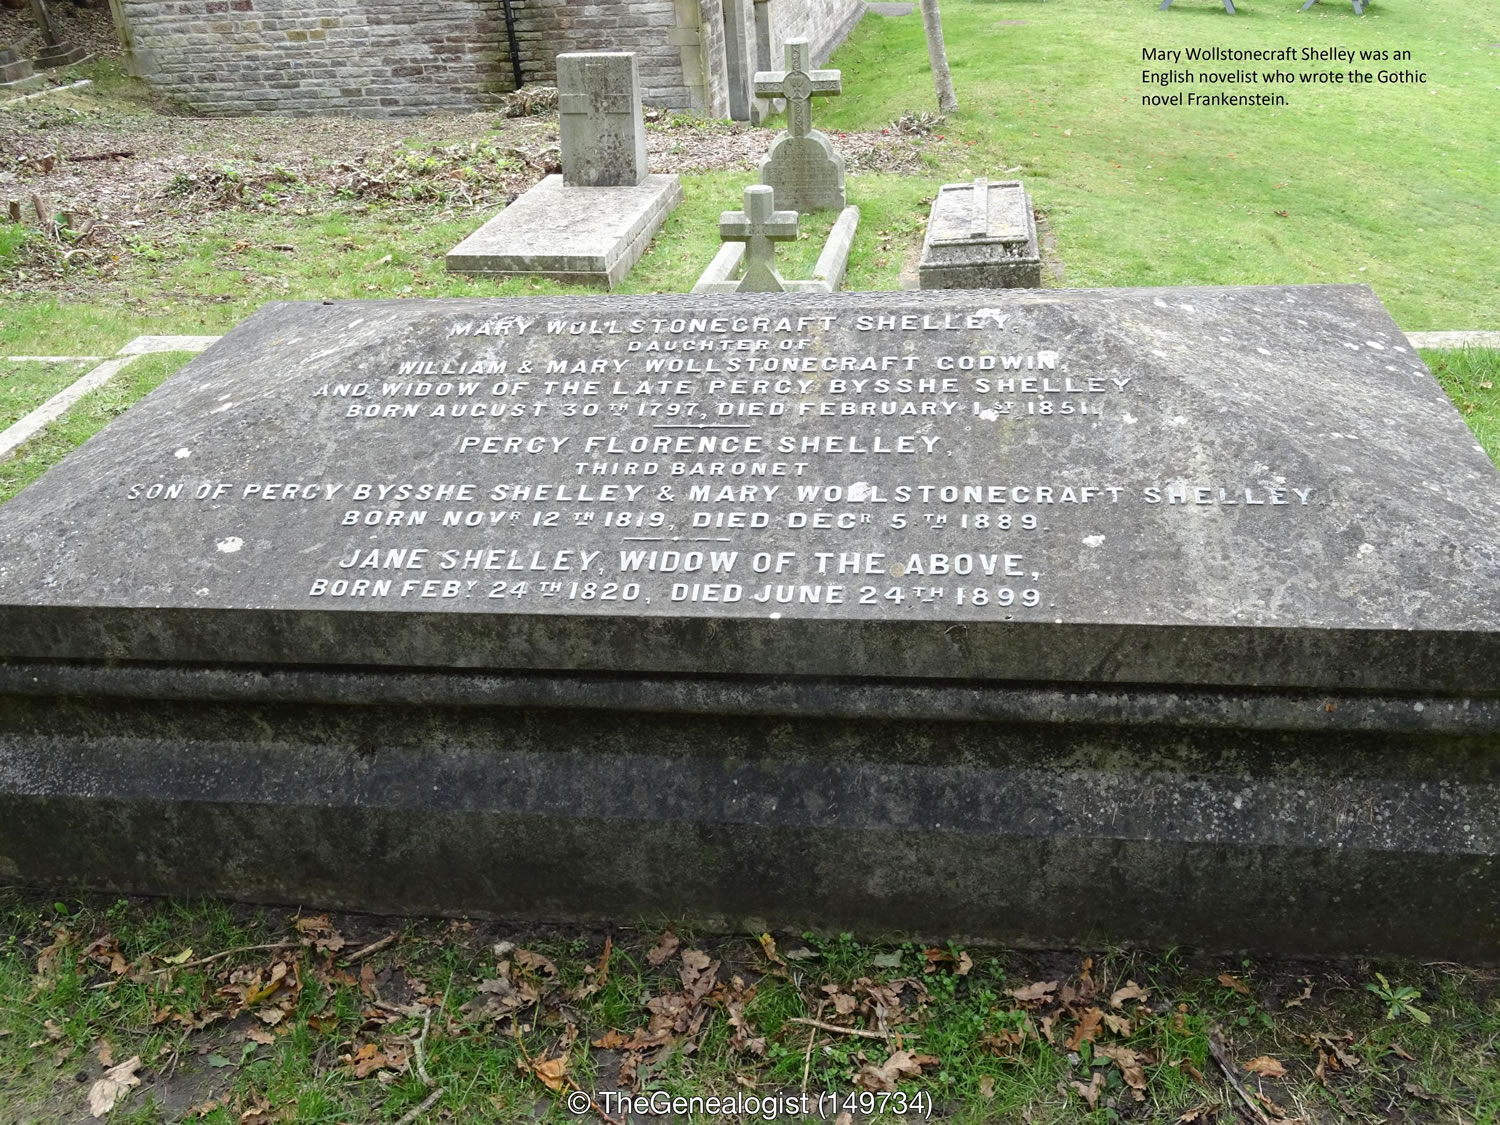 Image from TheGenealogist's Headstone Collection